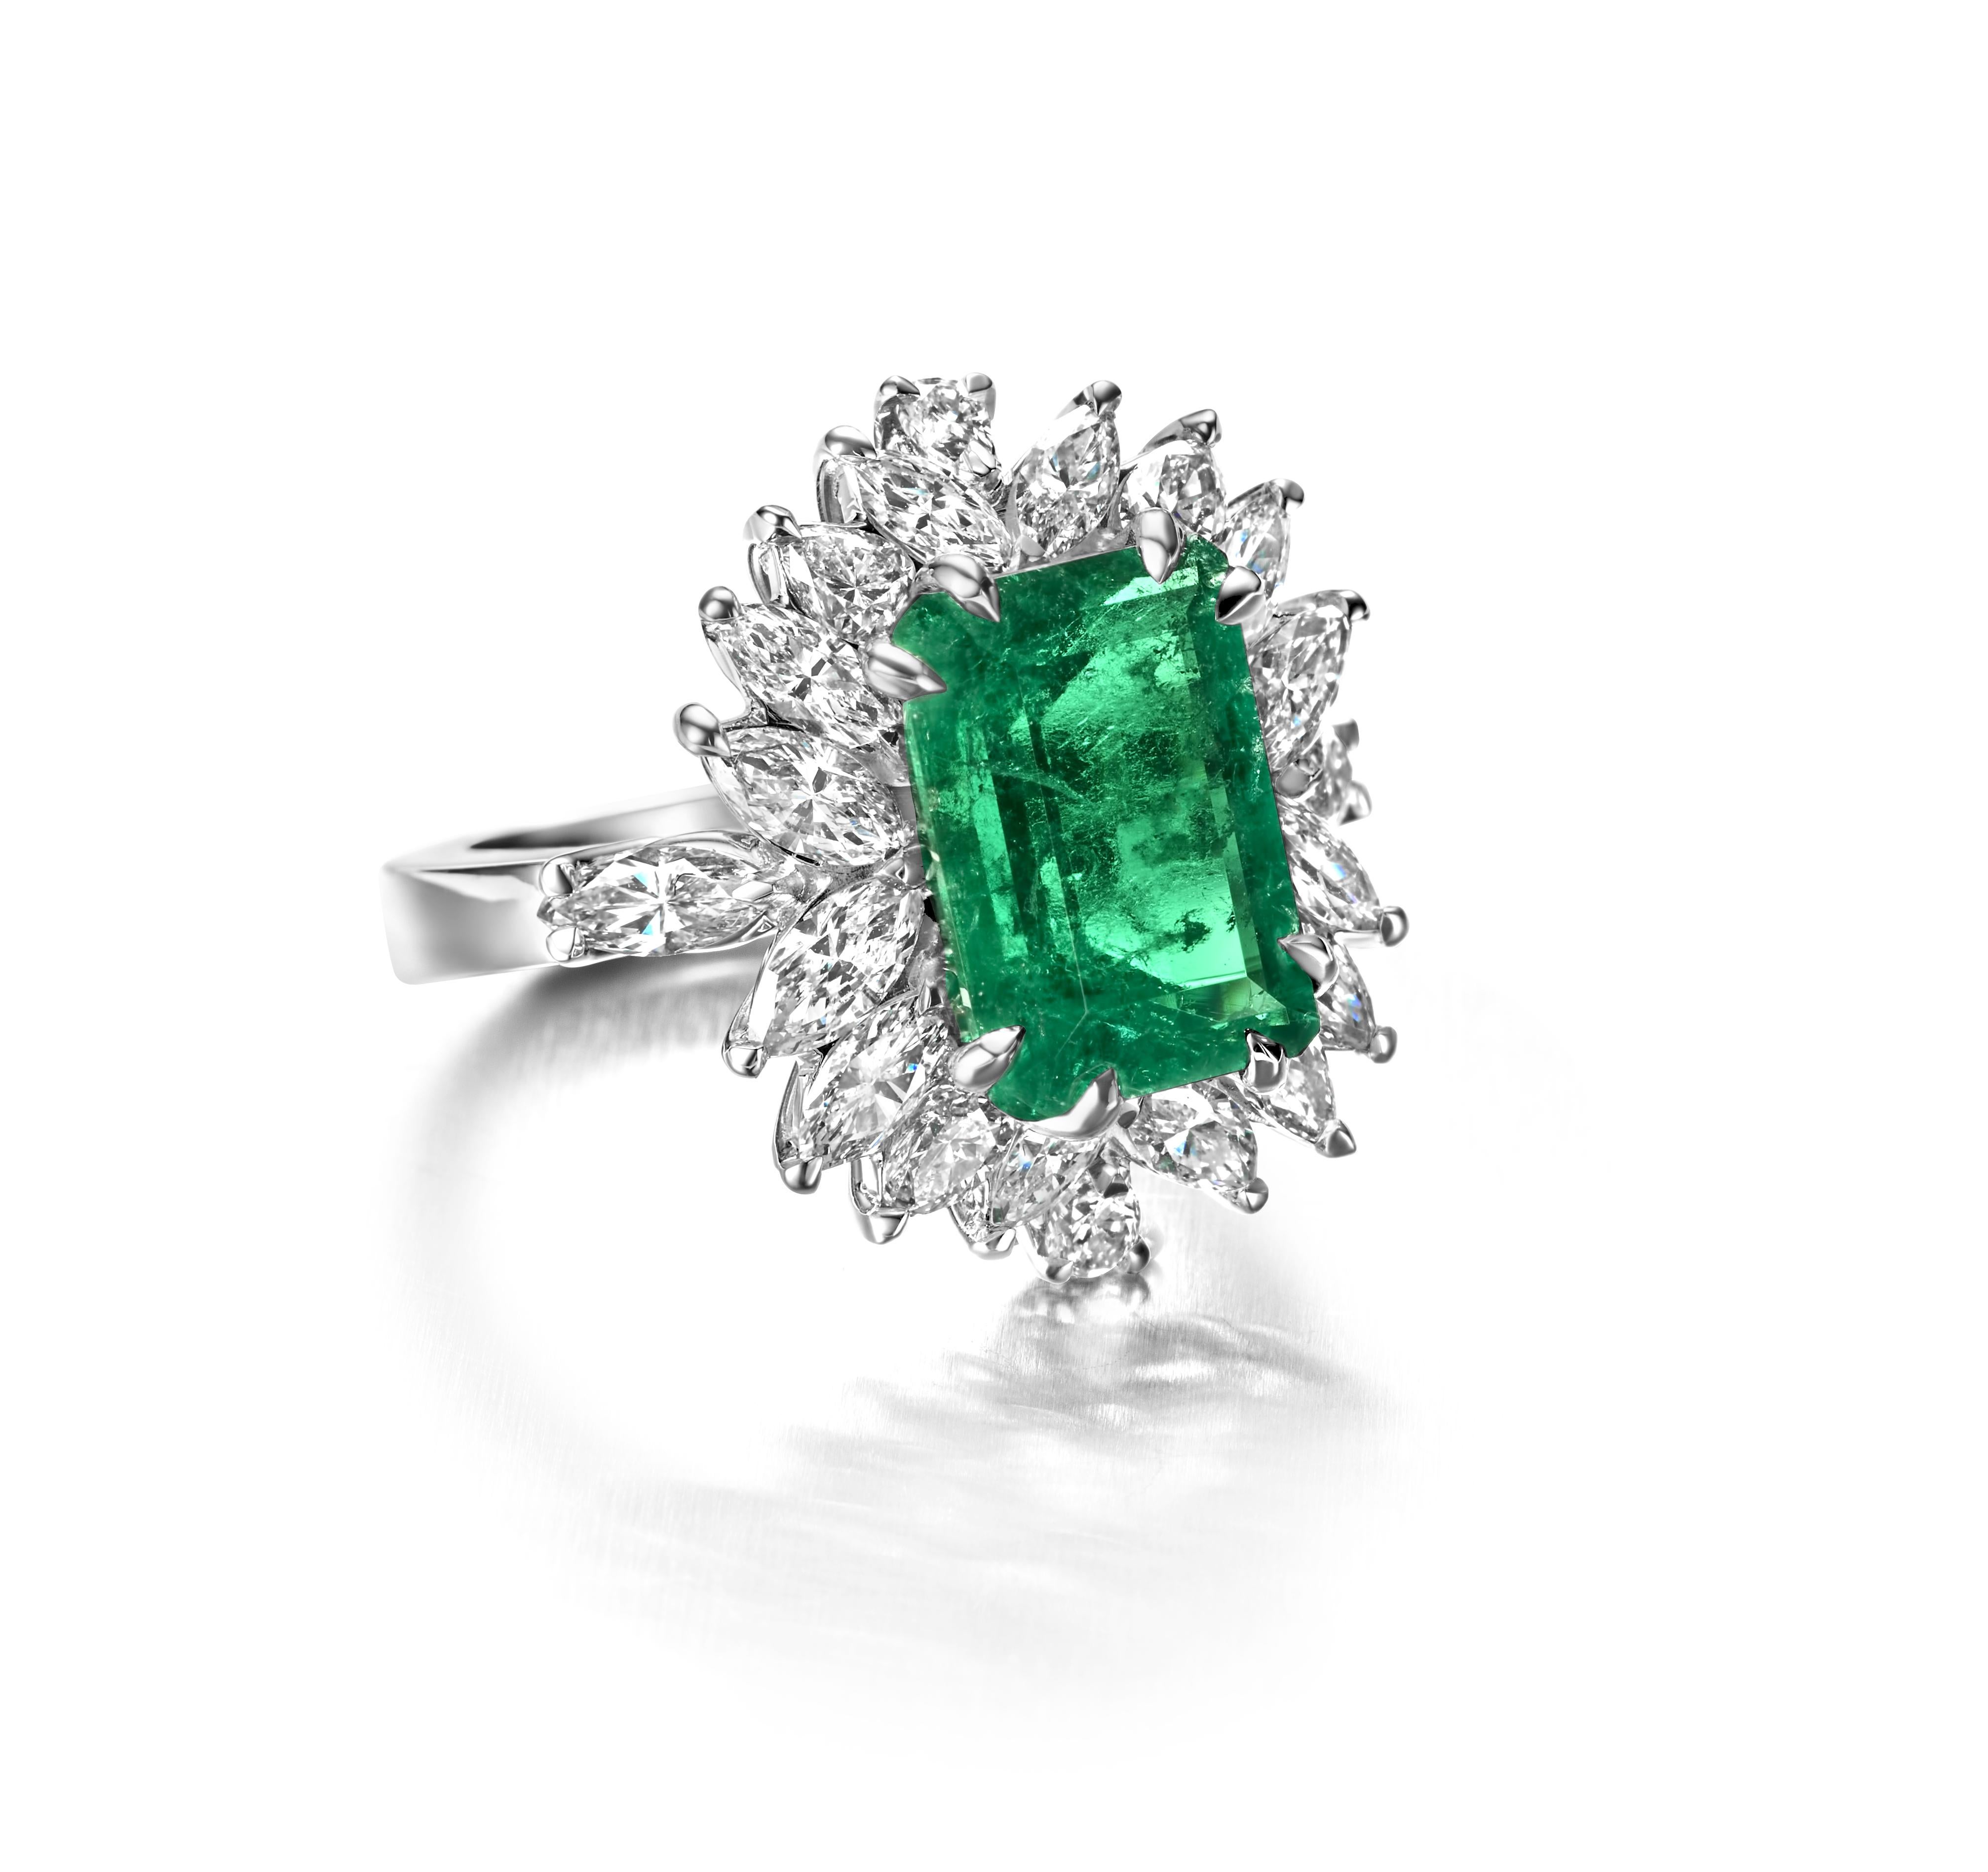 Beautiful 18kt Handmade White Gold Ring With 4.36 Ct Colombia Emerald Minor and Diamonds.

Emerald is one of the most difficult stones to photograph,so actually the Emerald is much more beautiful then pictured.....

Emerald: Natural Green Colombian